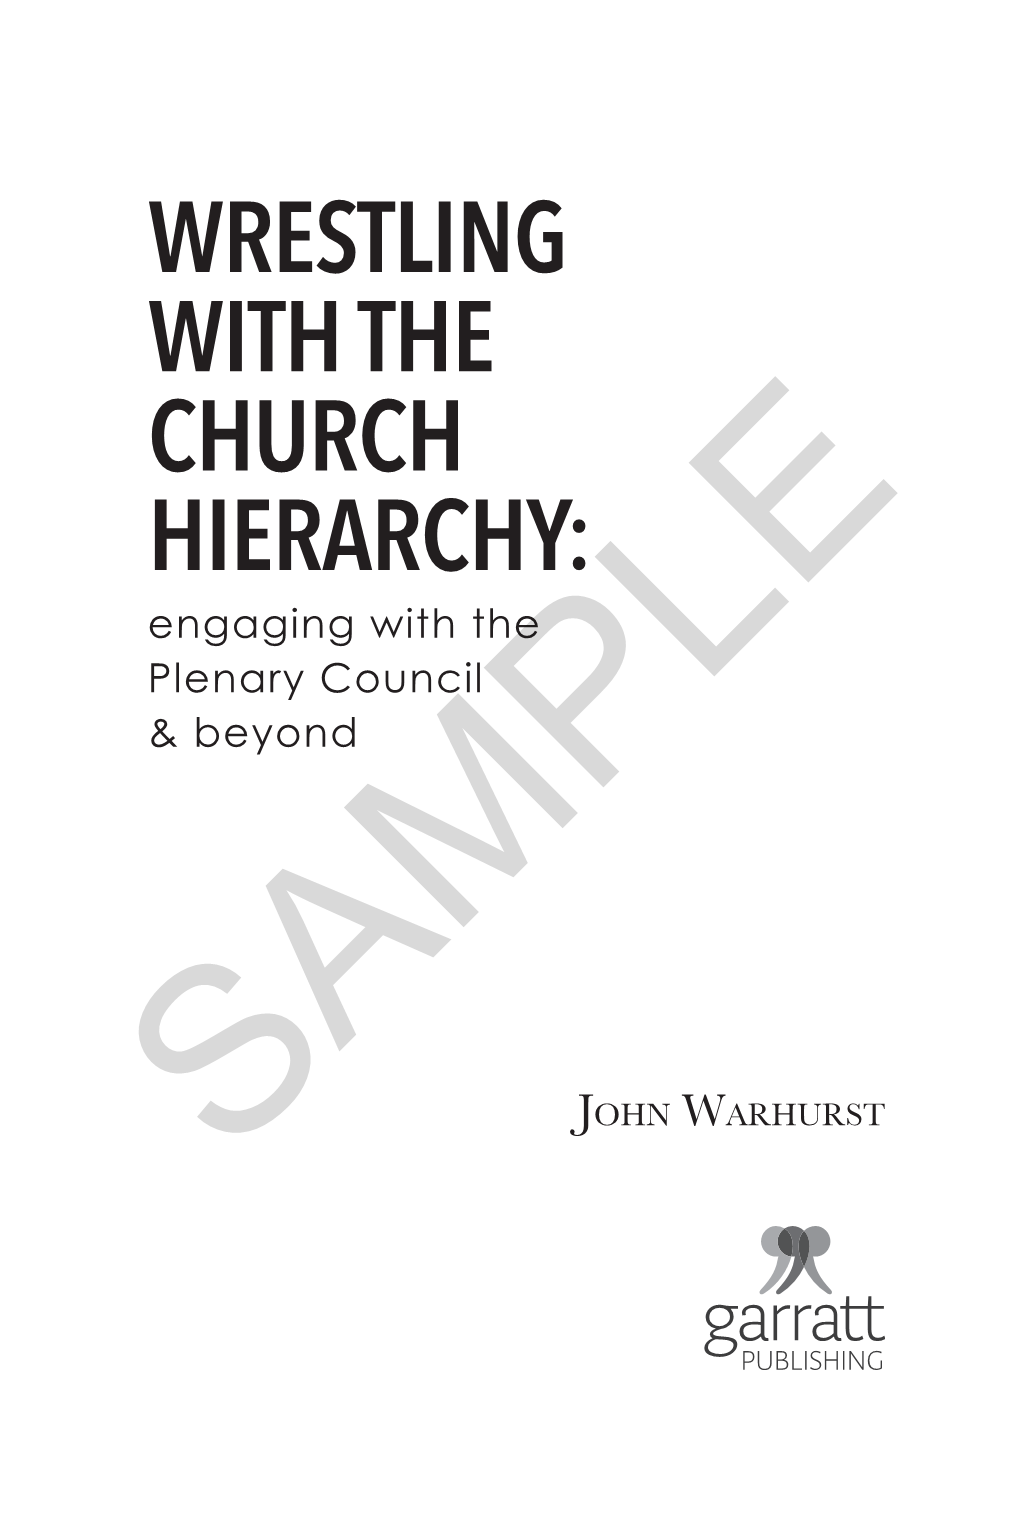 WRESTLING with the CHURCH HIERARCHY: Engaging with the Plenary Council & Beyond